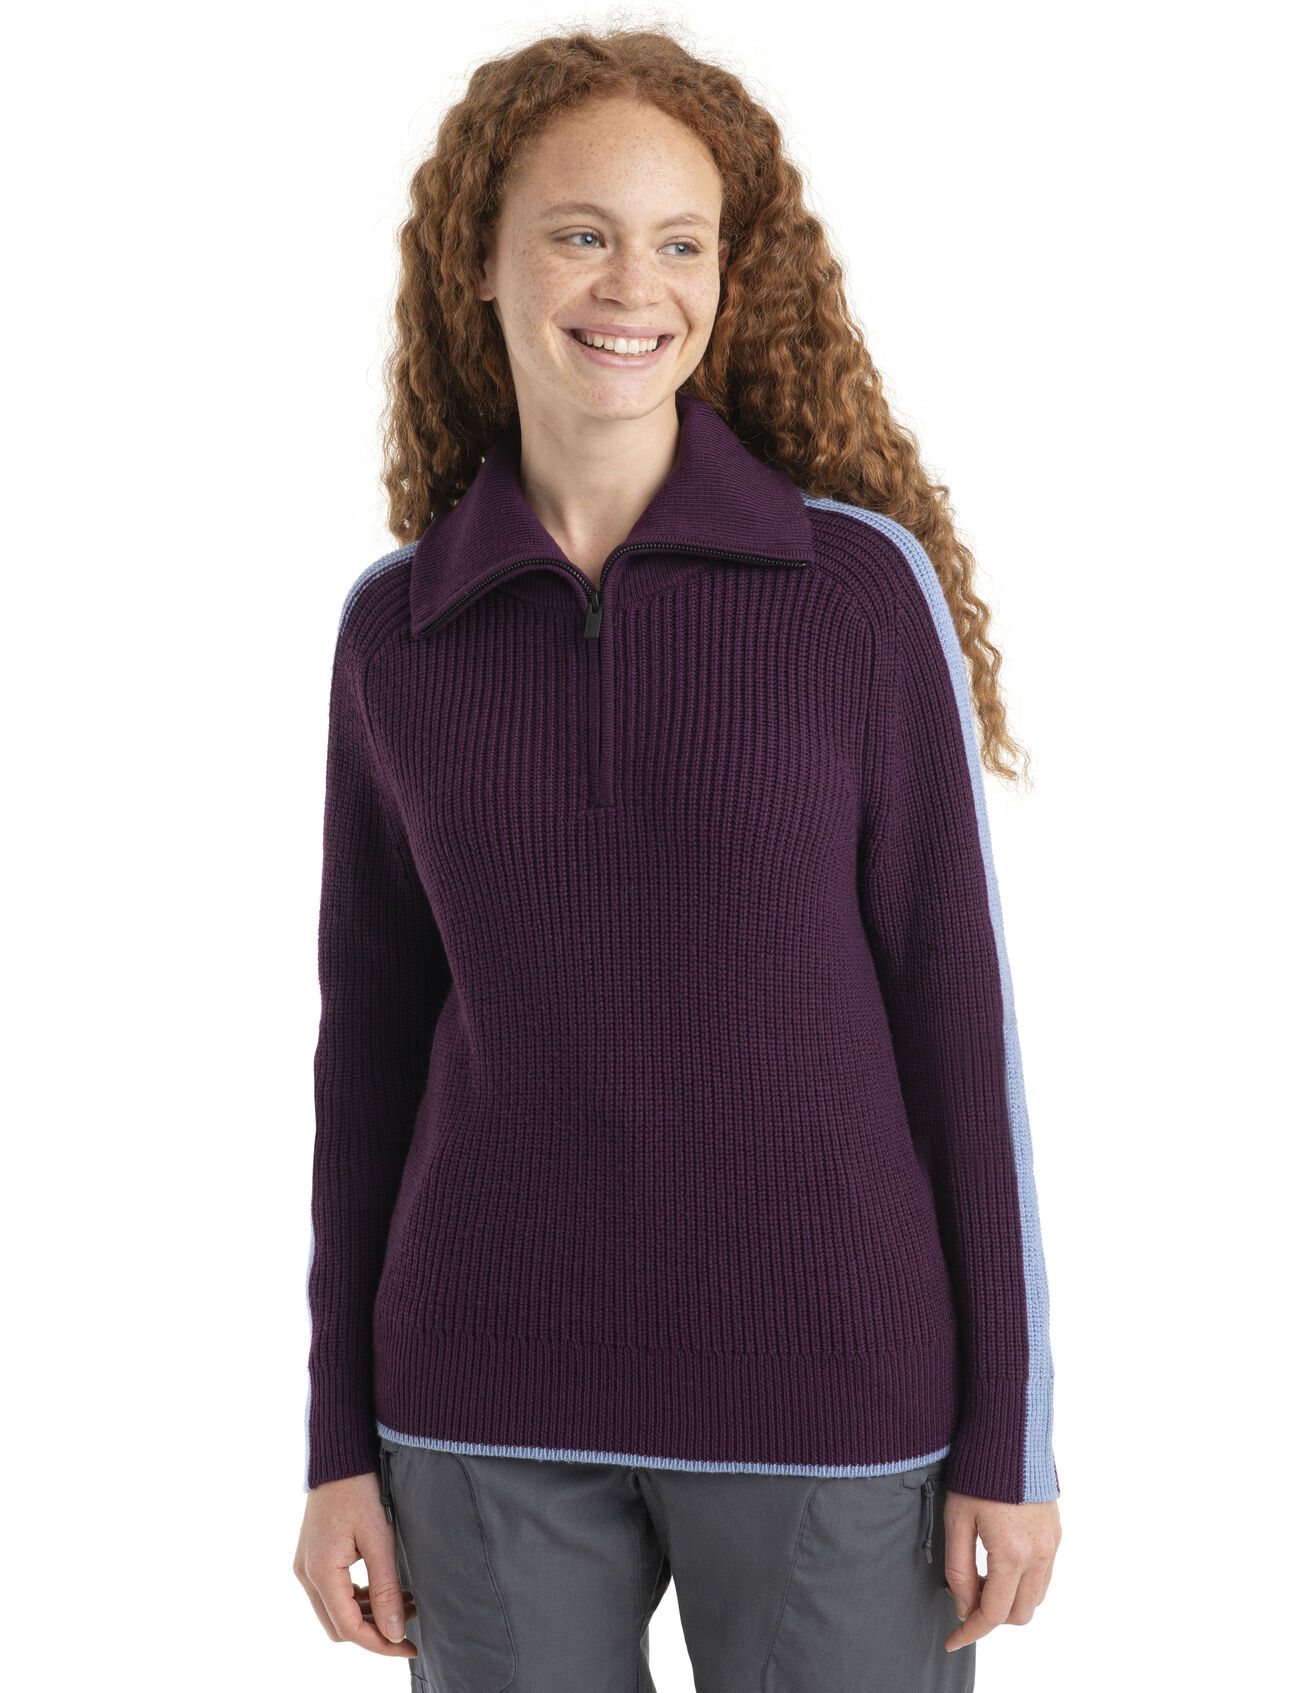 Womens Merino Lodge Long Sleeve Half Zip Sweater Inspired by our original half-zip merino pullover and reimagined with a warm, chunky knit and classic ski style, the Lodge Long Sleeve Half Zip Sweater is the quintessential cold-weather style piece.